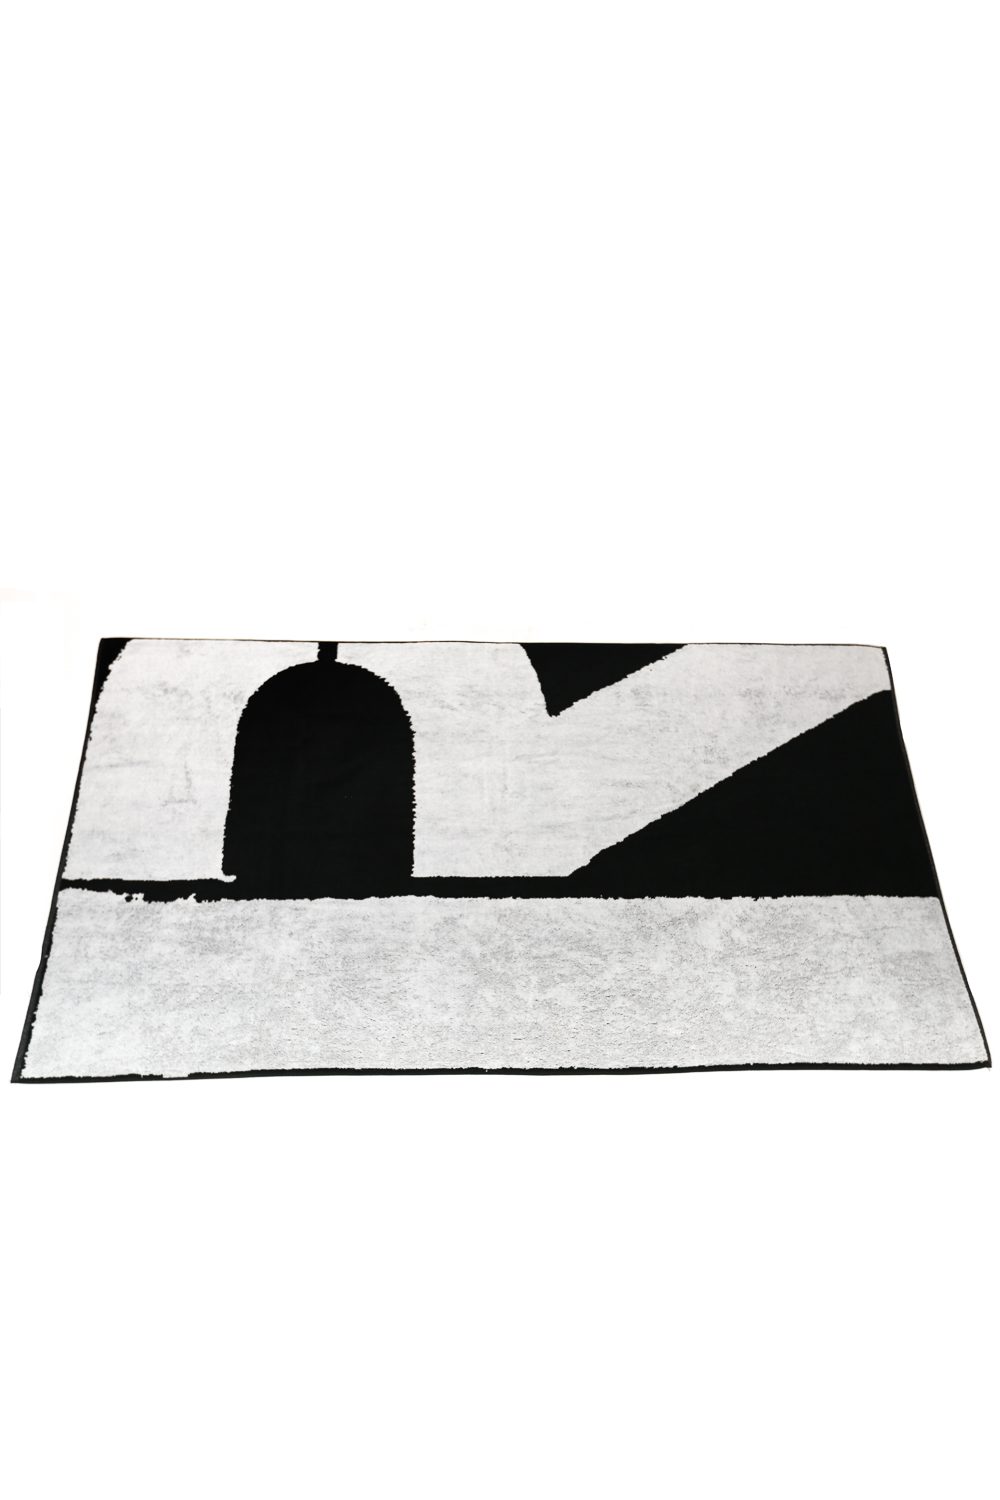 SS09 Christopher Wool “R” Towel